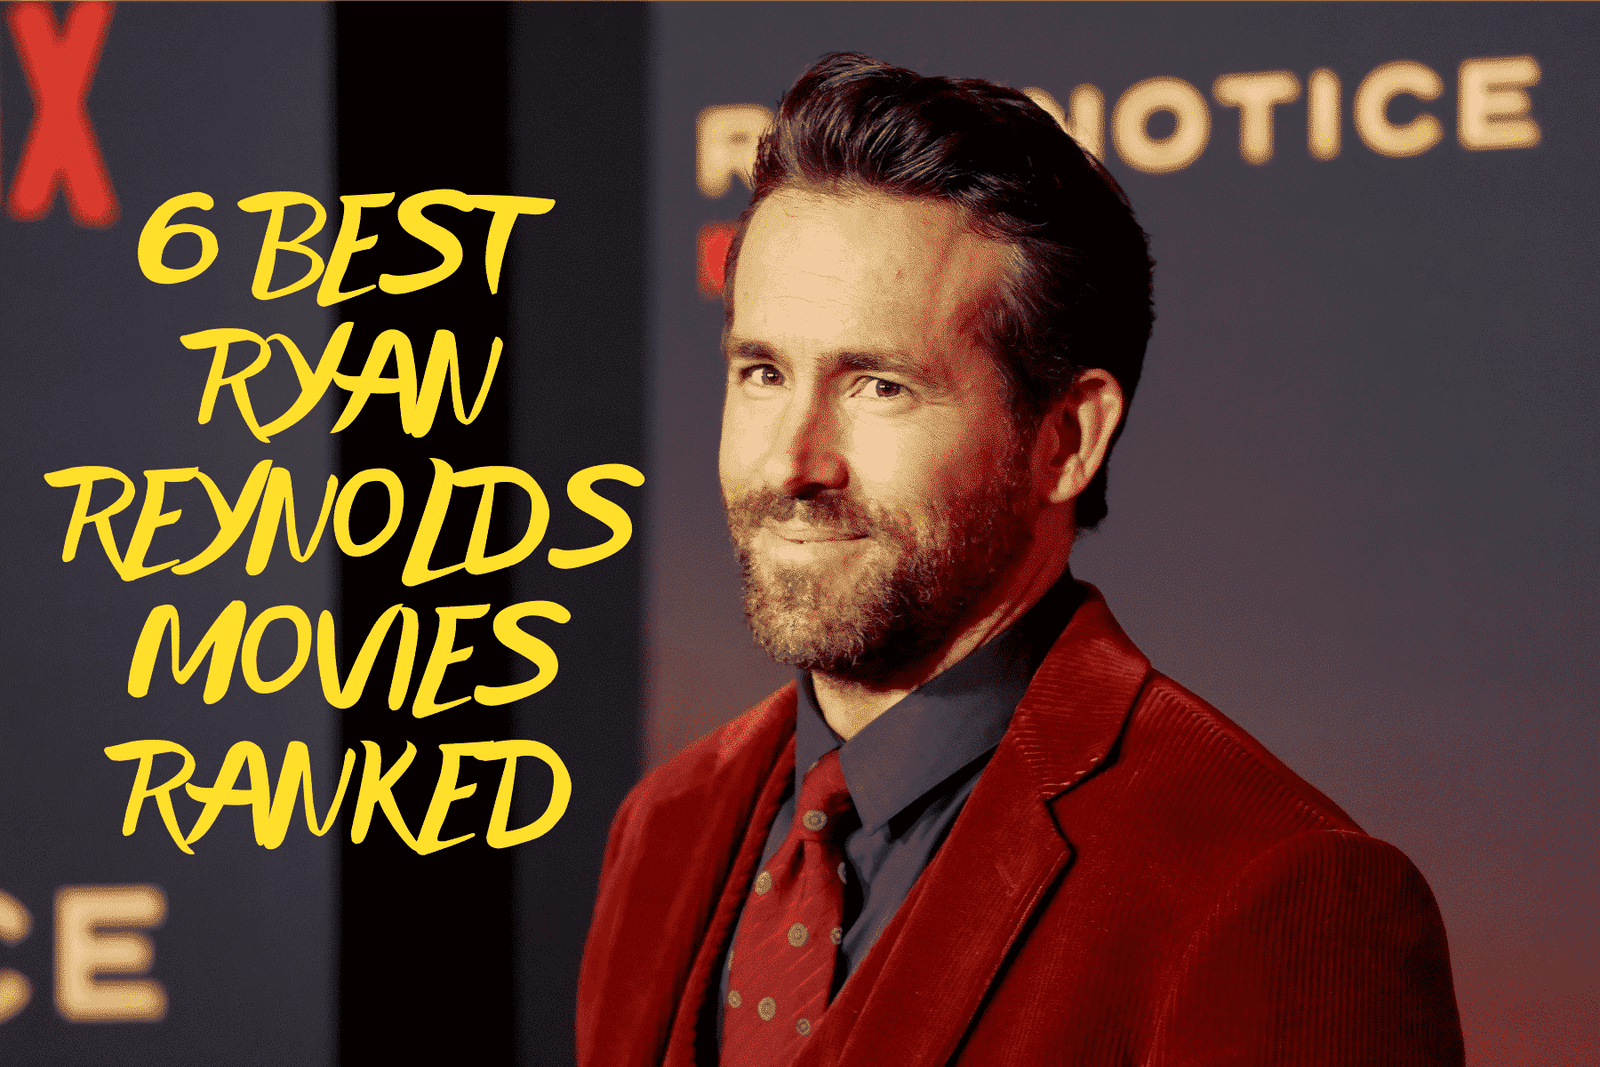 6 Best Ryan Reynolds Movies Ranked - The Adam Project Actor